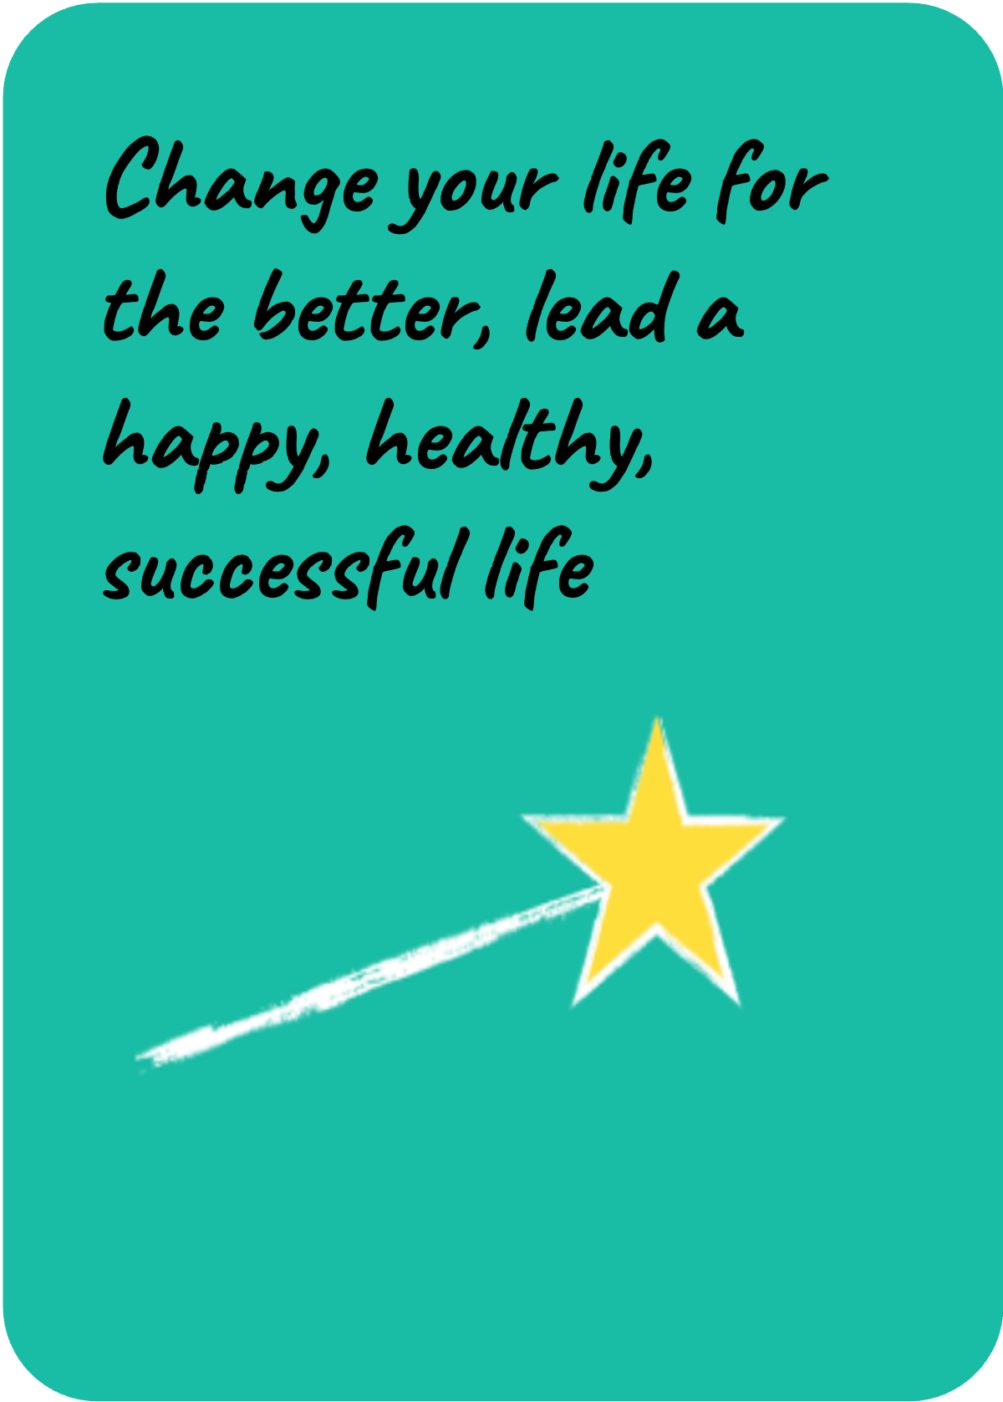 Change your life for the better, lead a happy, healthy, successful life